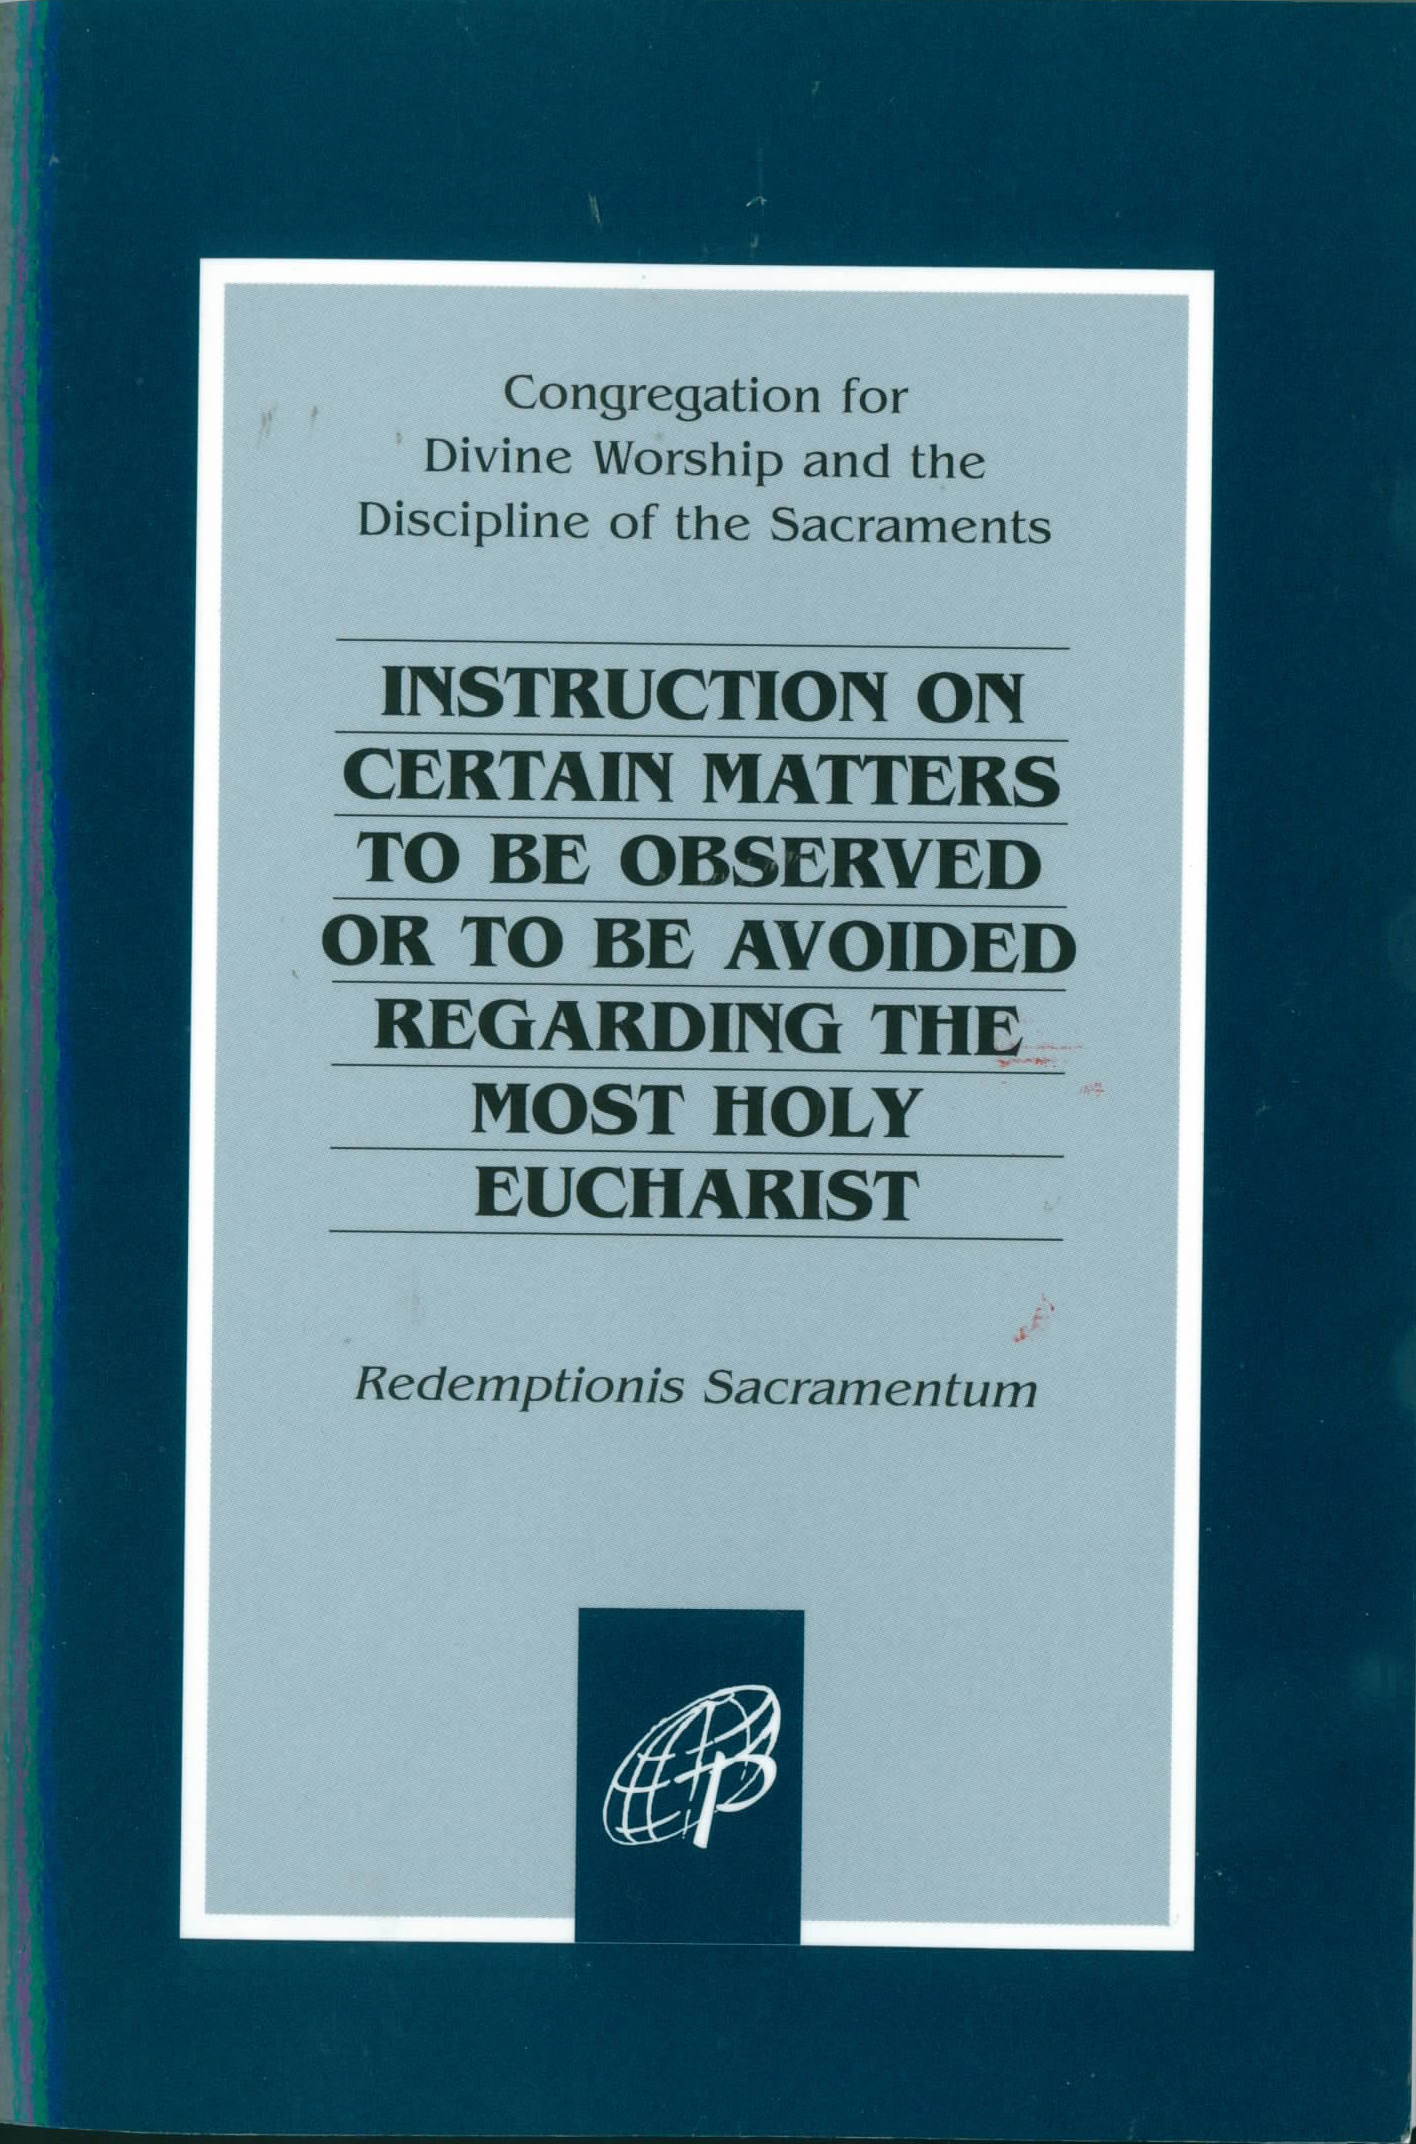 Redemptionis Sacramentum  Instruction on Certain Matters to Be Observed or to Be Avoided Regarding the Most Holy Eucharist from Pauline Books & Media 159-9780819864826